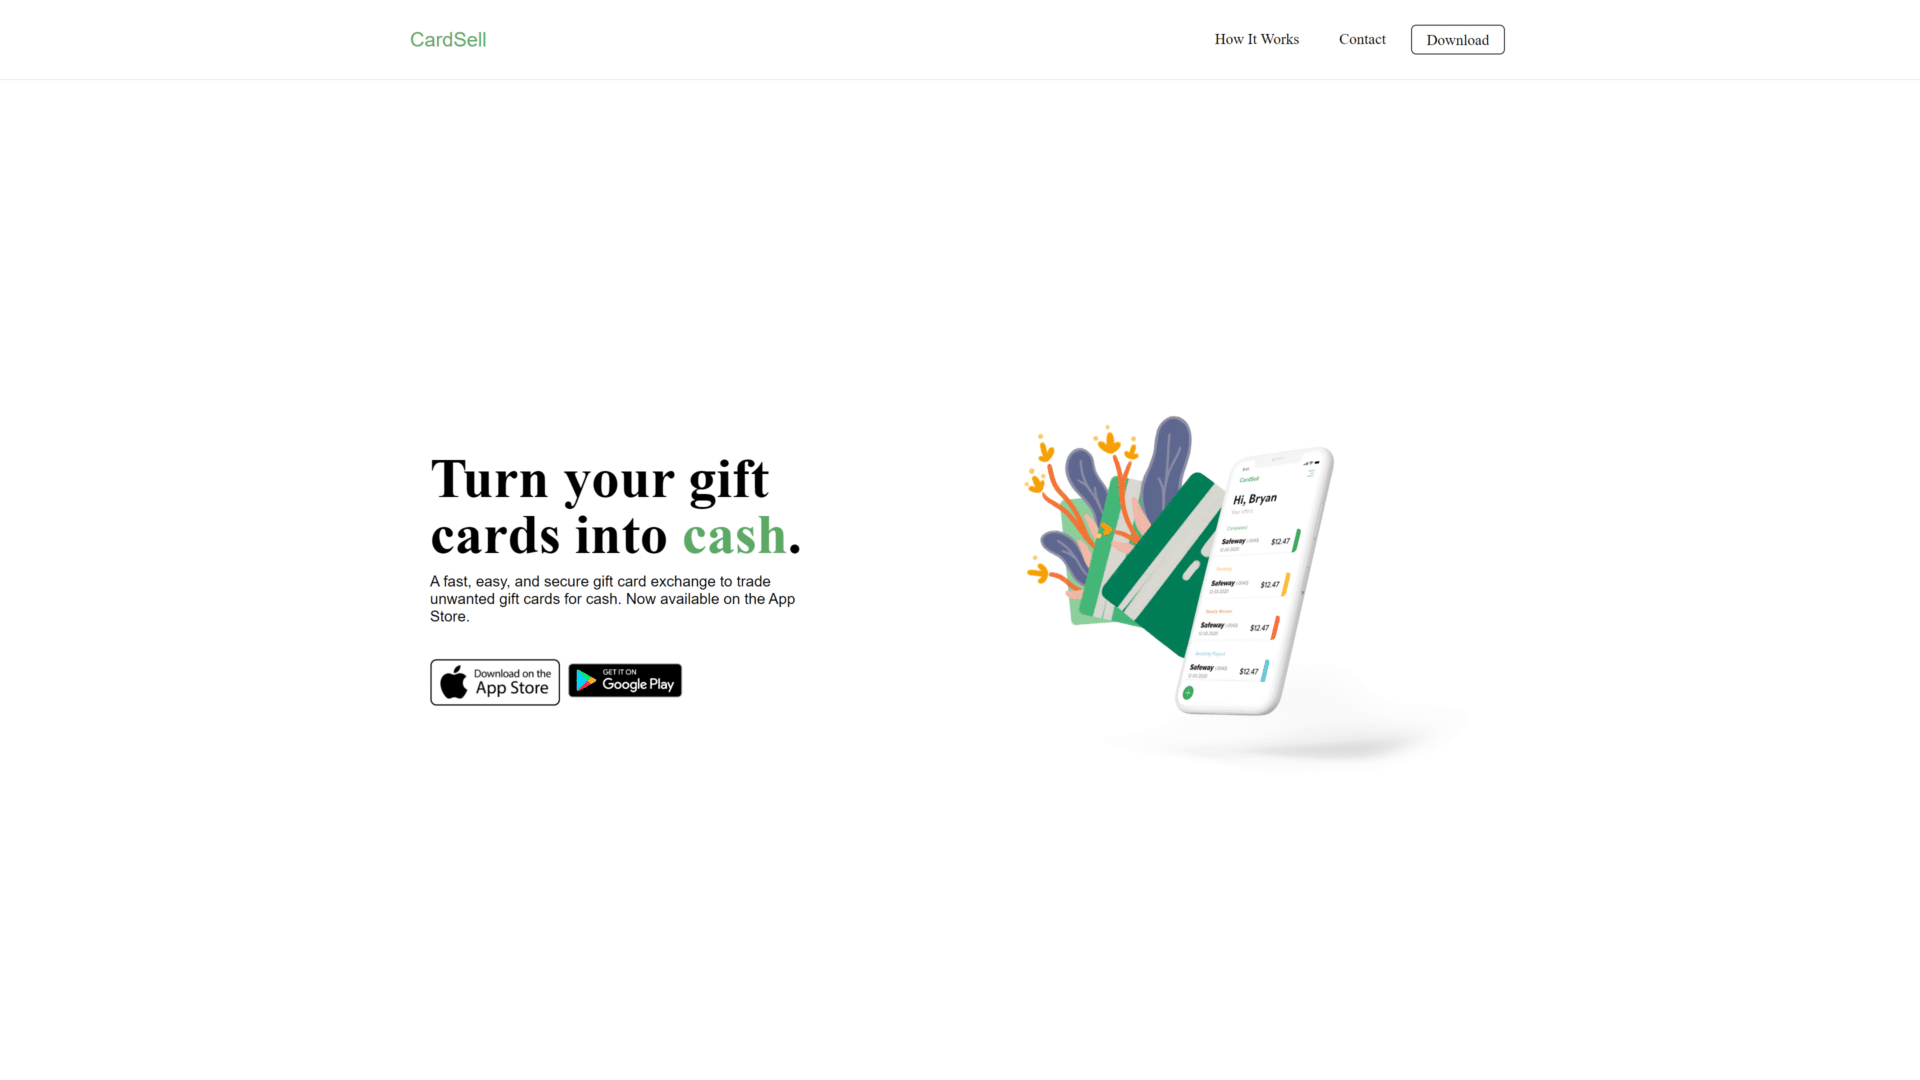 A screenshot of the card sell homepage